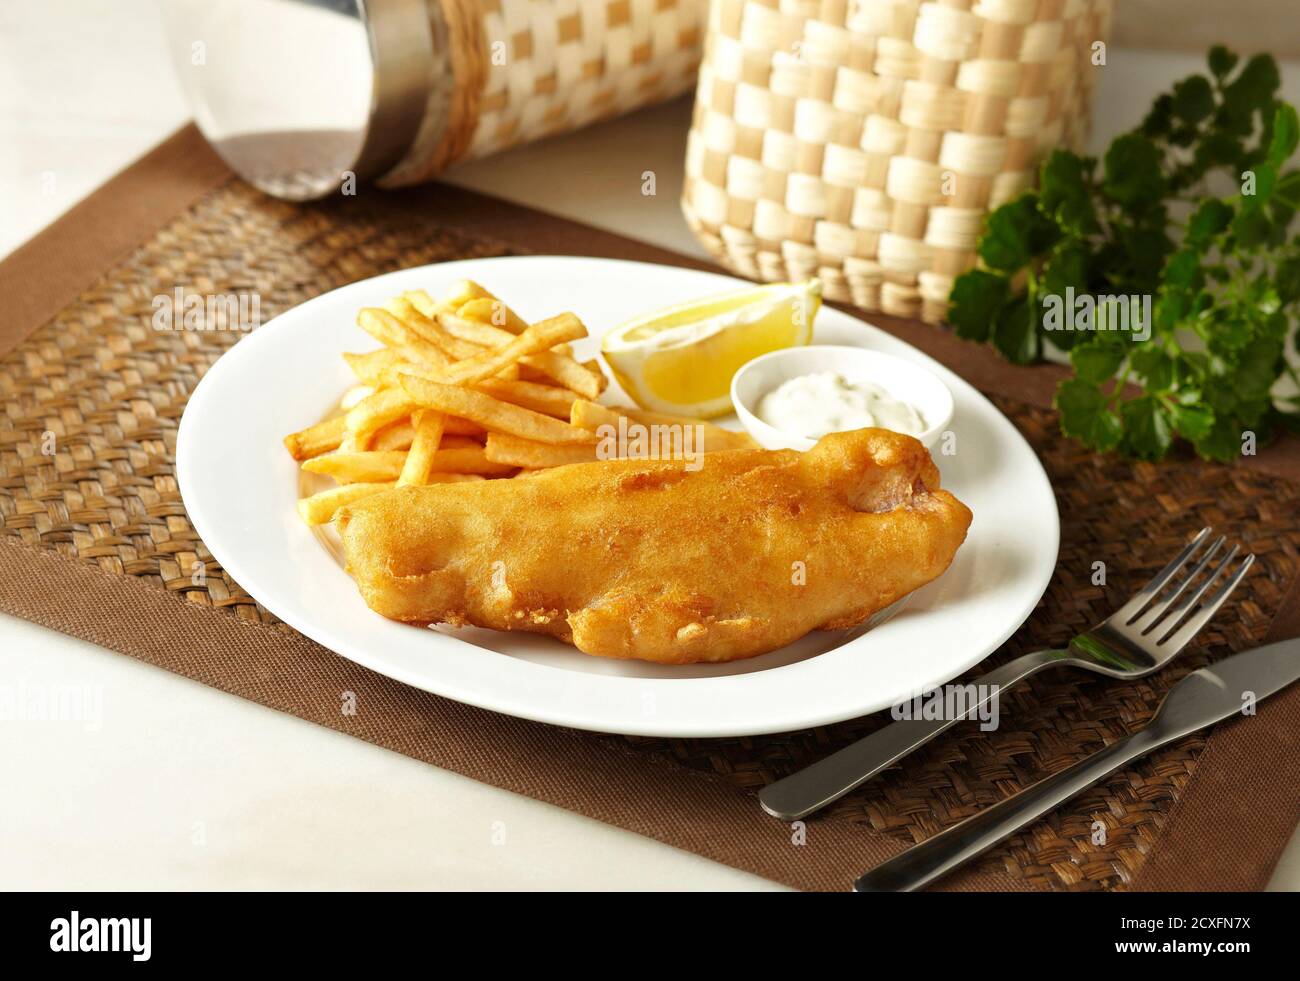 Fish and chips with french fries Stock Photo